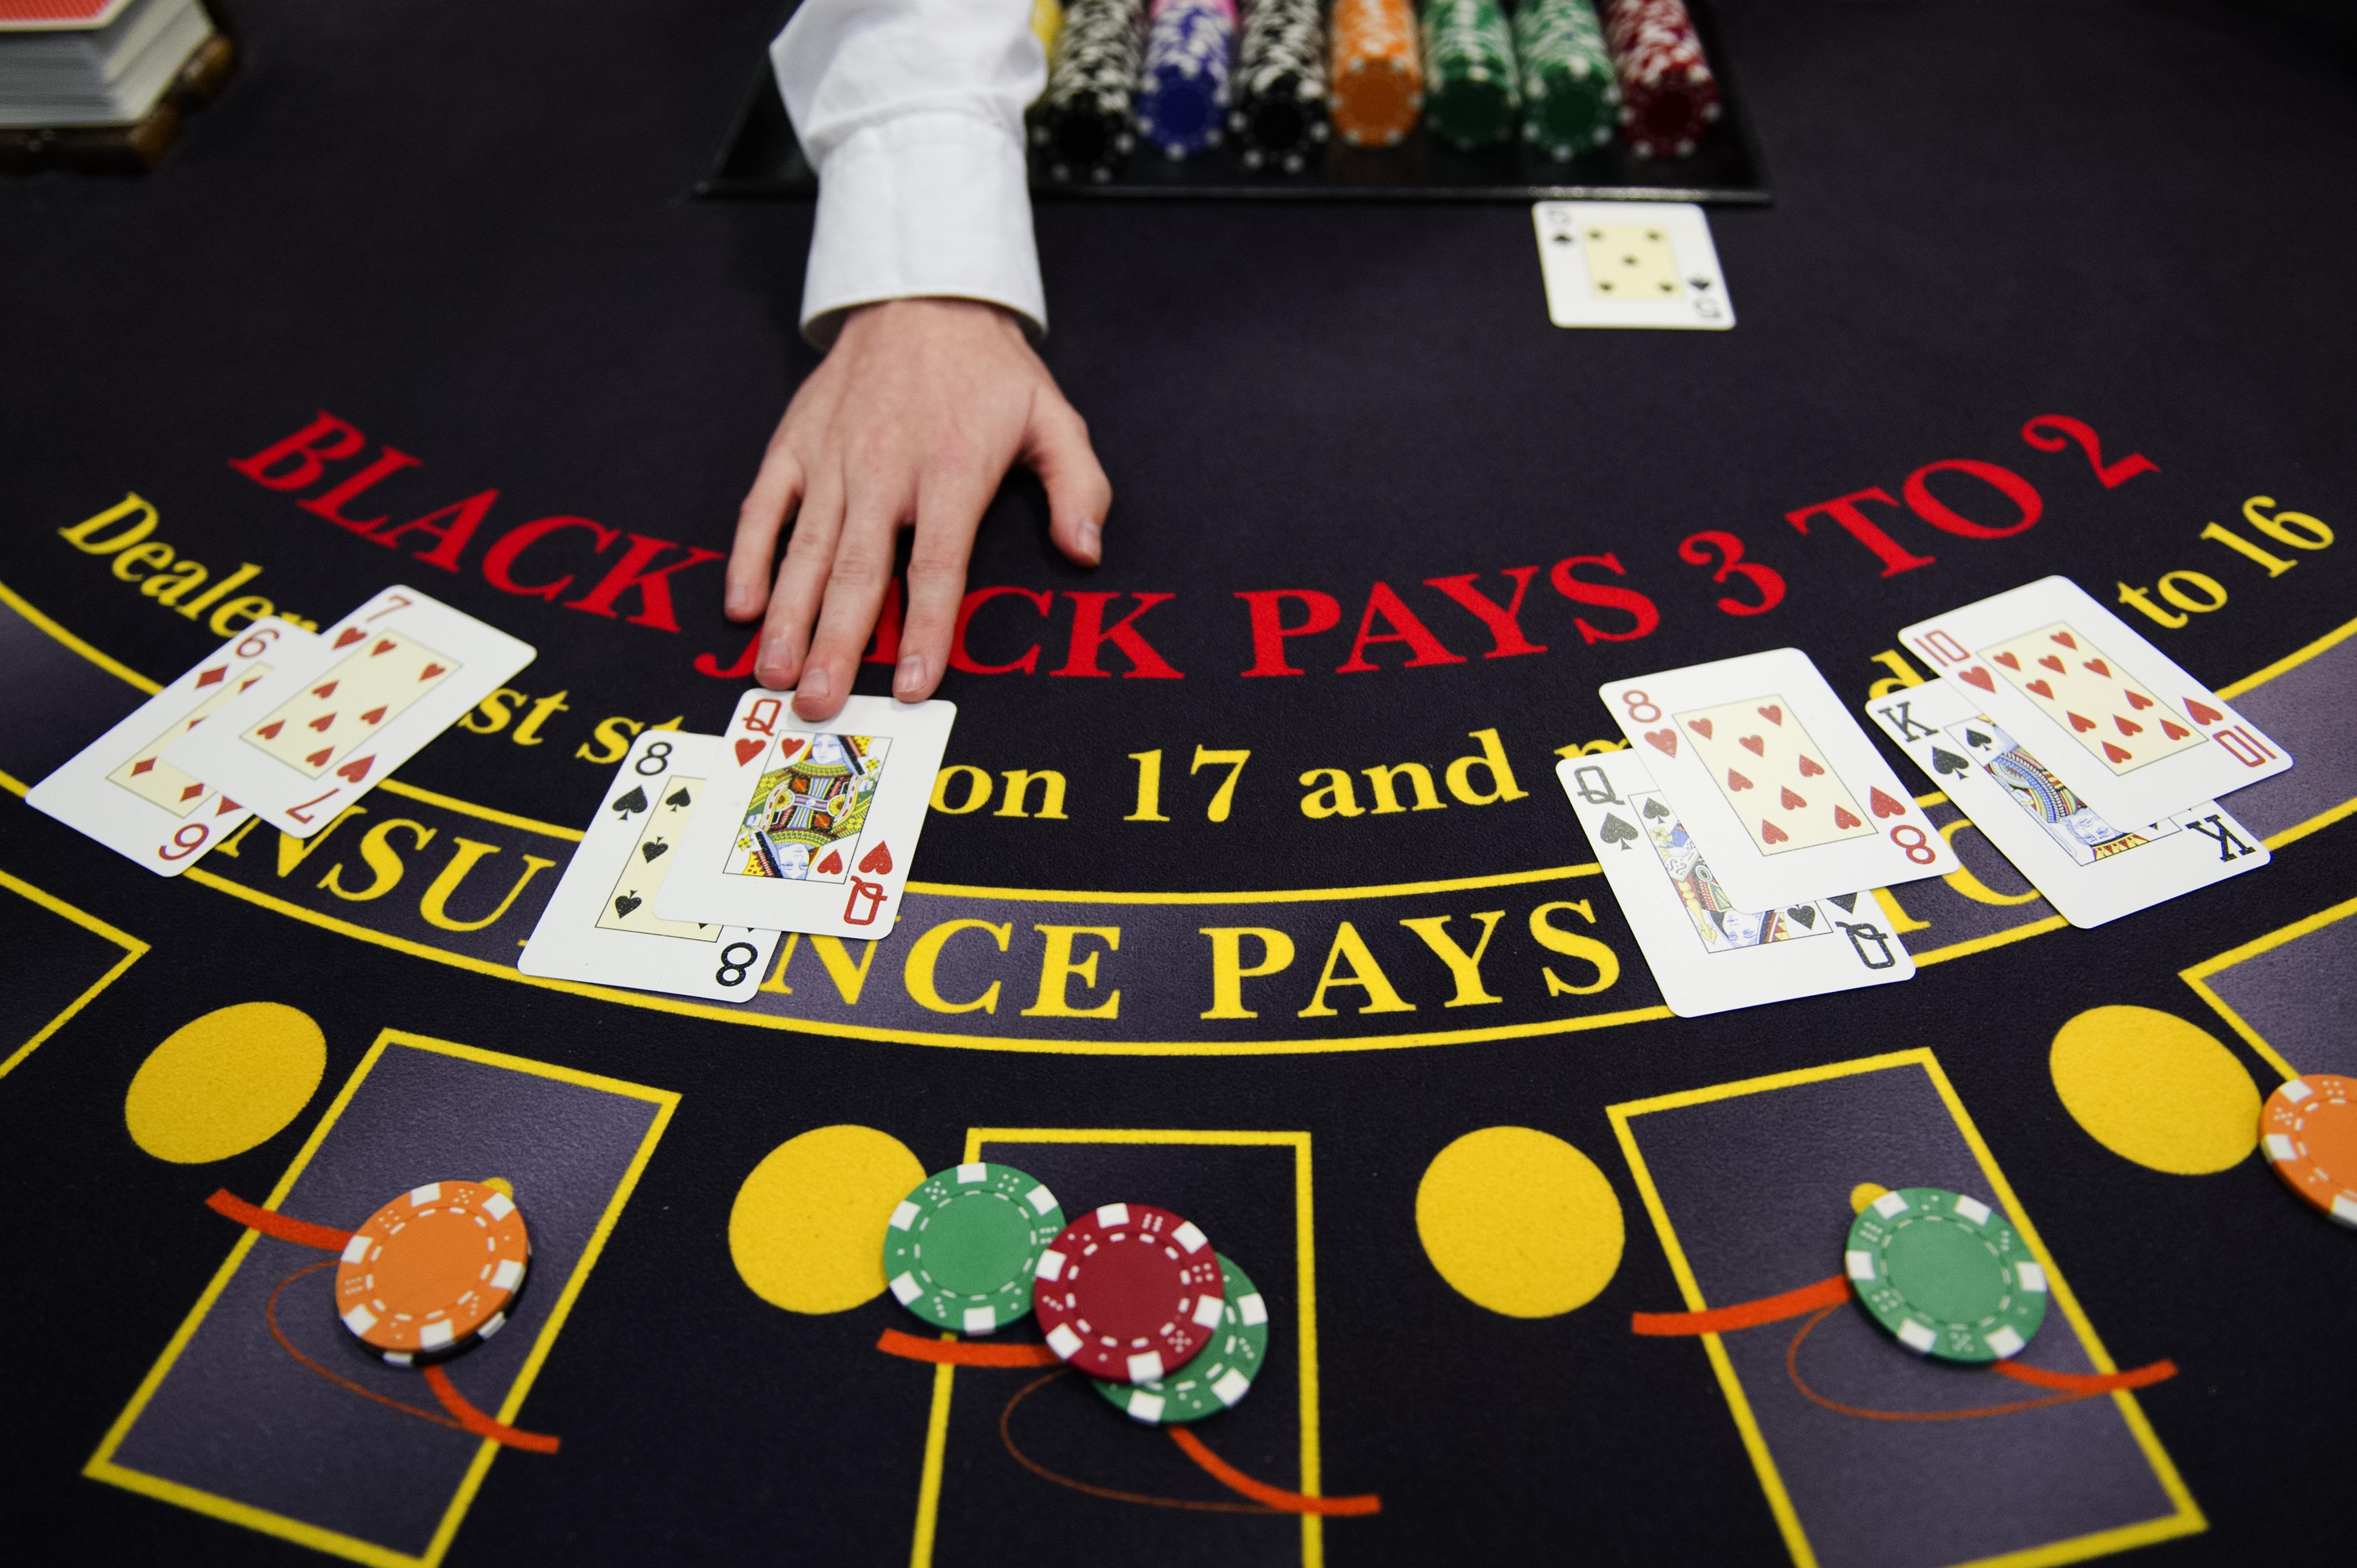 Dealing craps and blackjack: What&#39;s it like to work as a casino dealer?